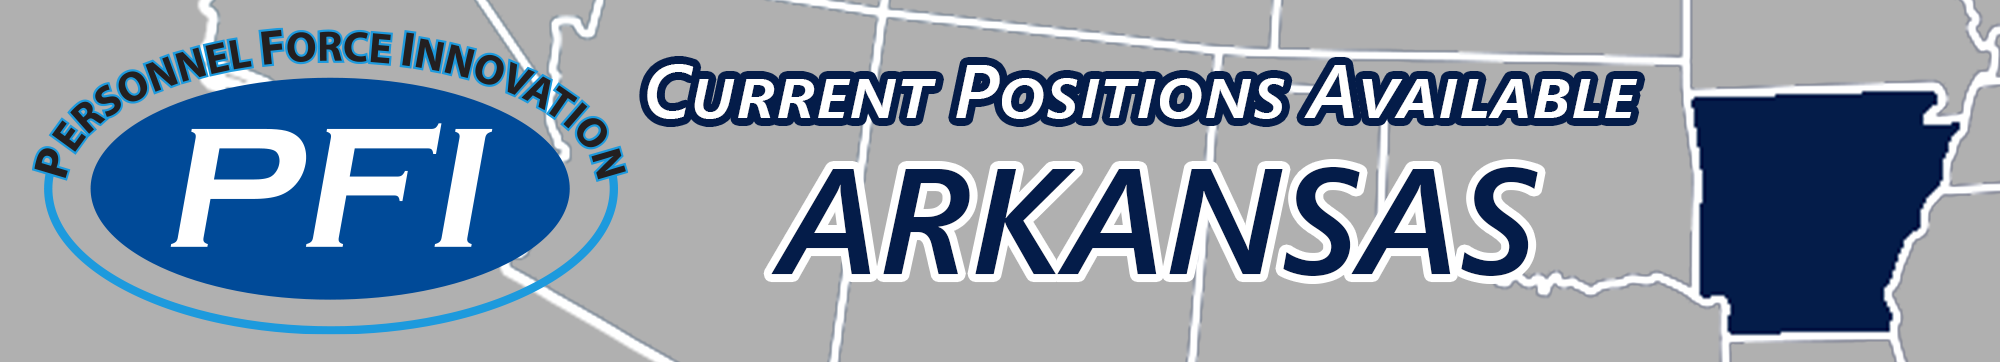 Decorative banner that says Personnel Force Innovation (PFI) current positions available Arkansas